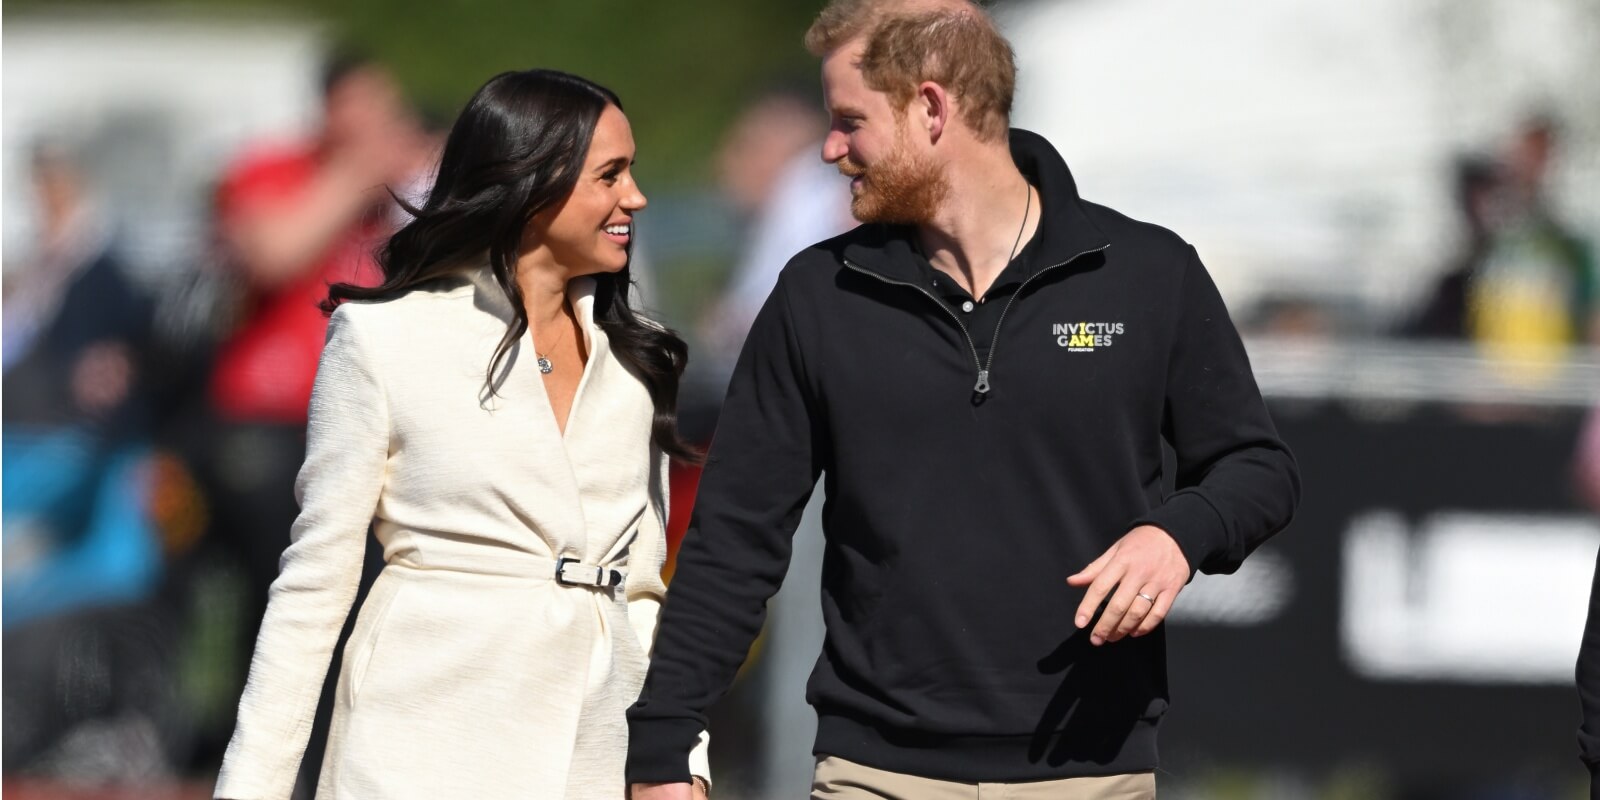 Meghan Markle and Prince Harry photographed at the 2022 Invictus Games in the Netherlands.